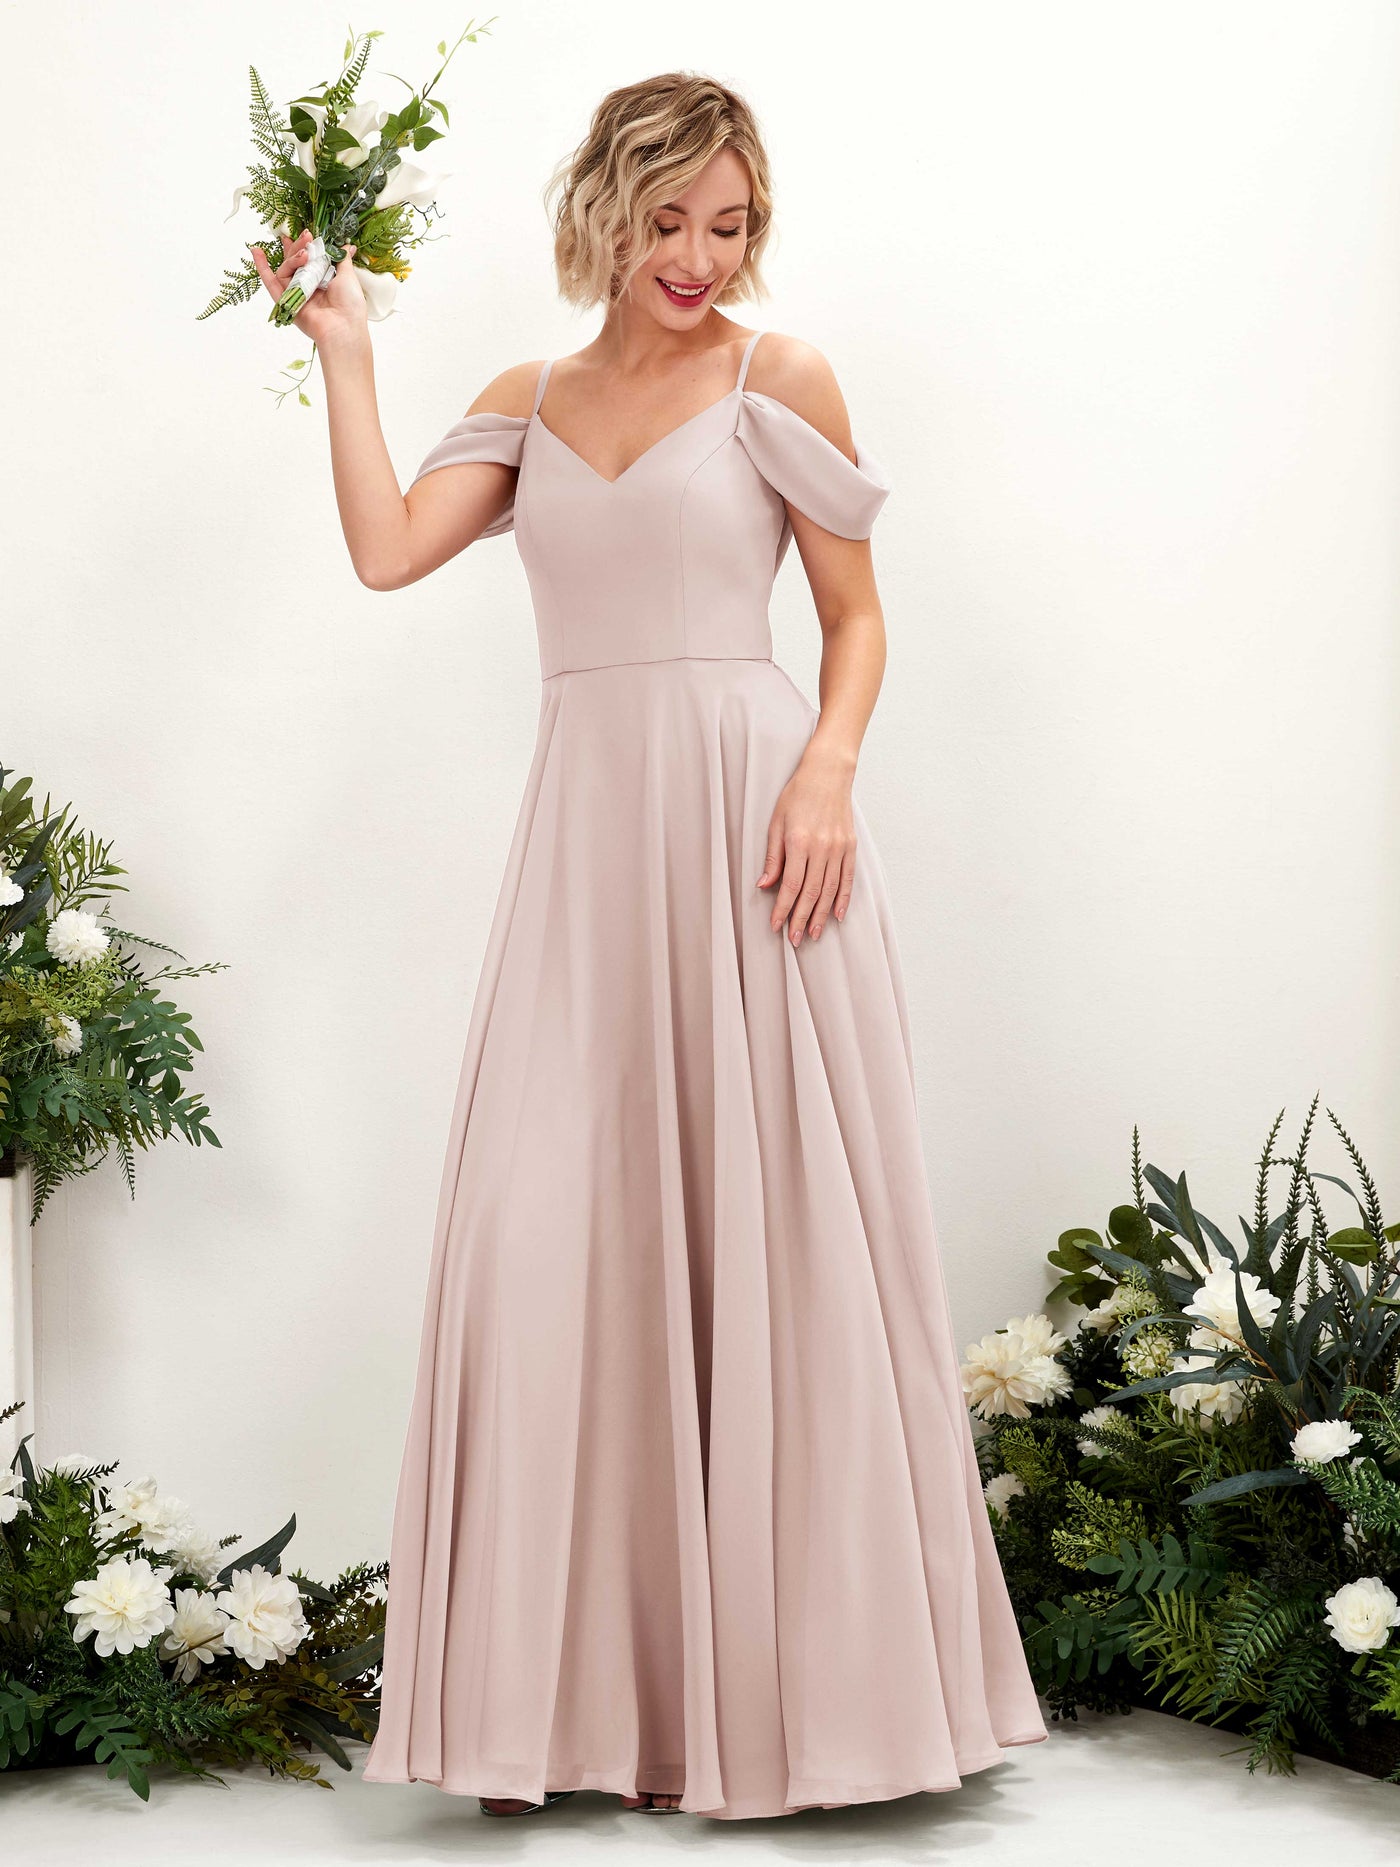 Biscotti Bridesmaid Dresses Bridesmaid Dress A-line Chiffon Off Shoulder Full Length Sleeveless Wedding Party Dress (81224935)#color_biscotti